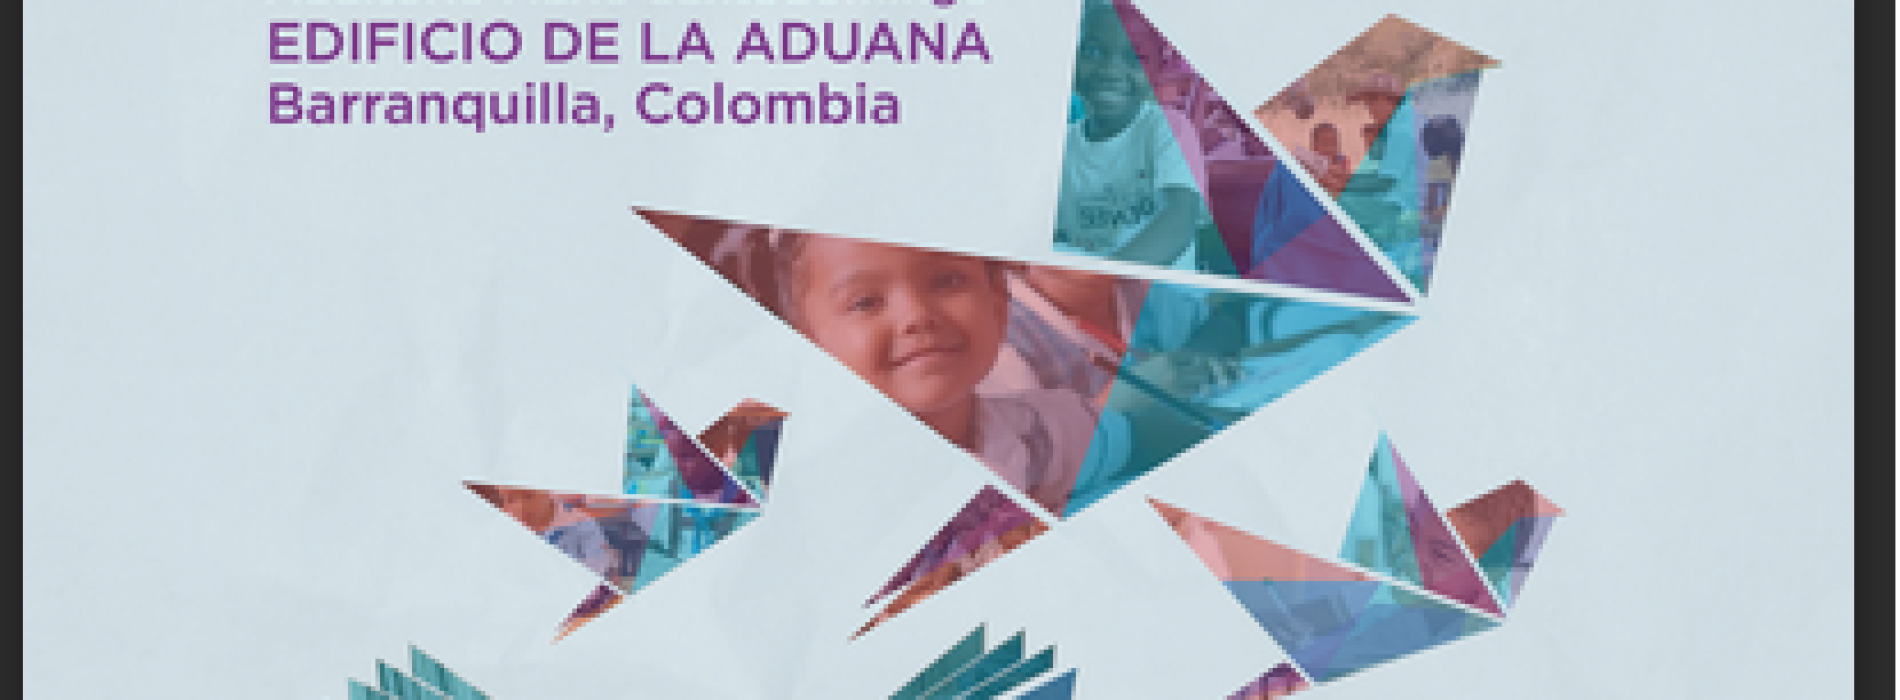 Program posted for ISCHE Regional Workshop – Baranquilla Colombia, 3-4 February 2016